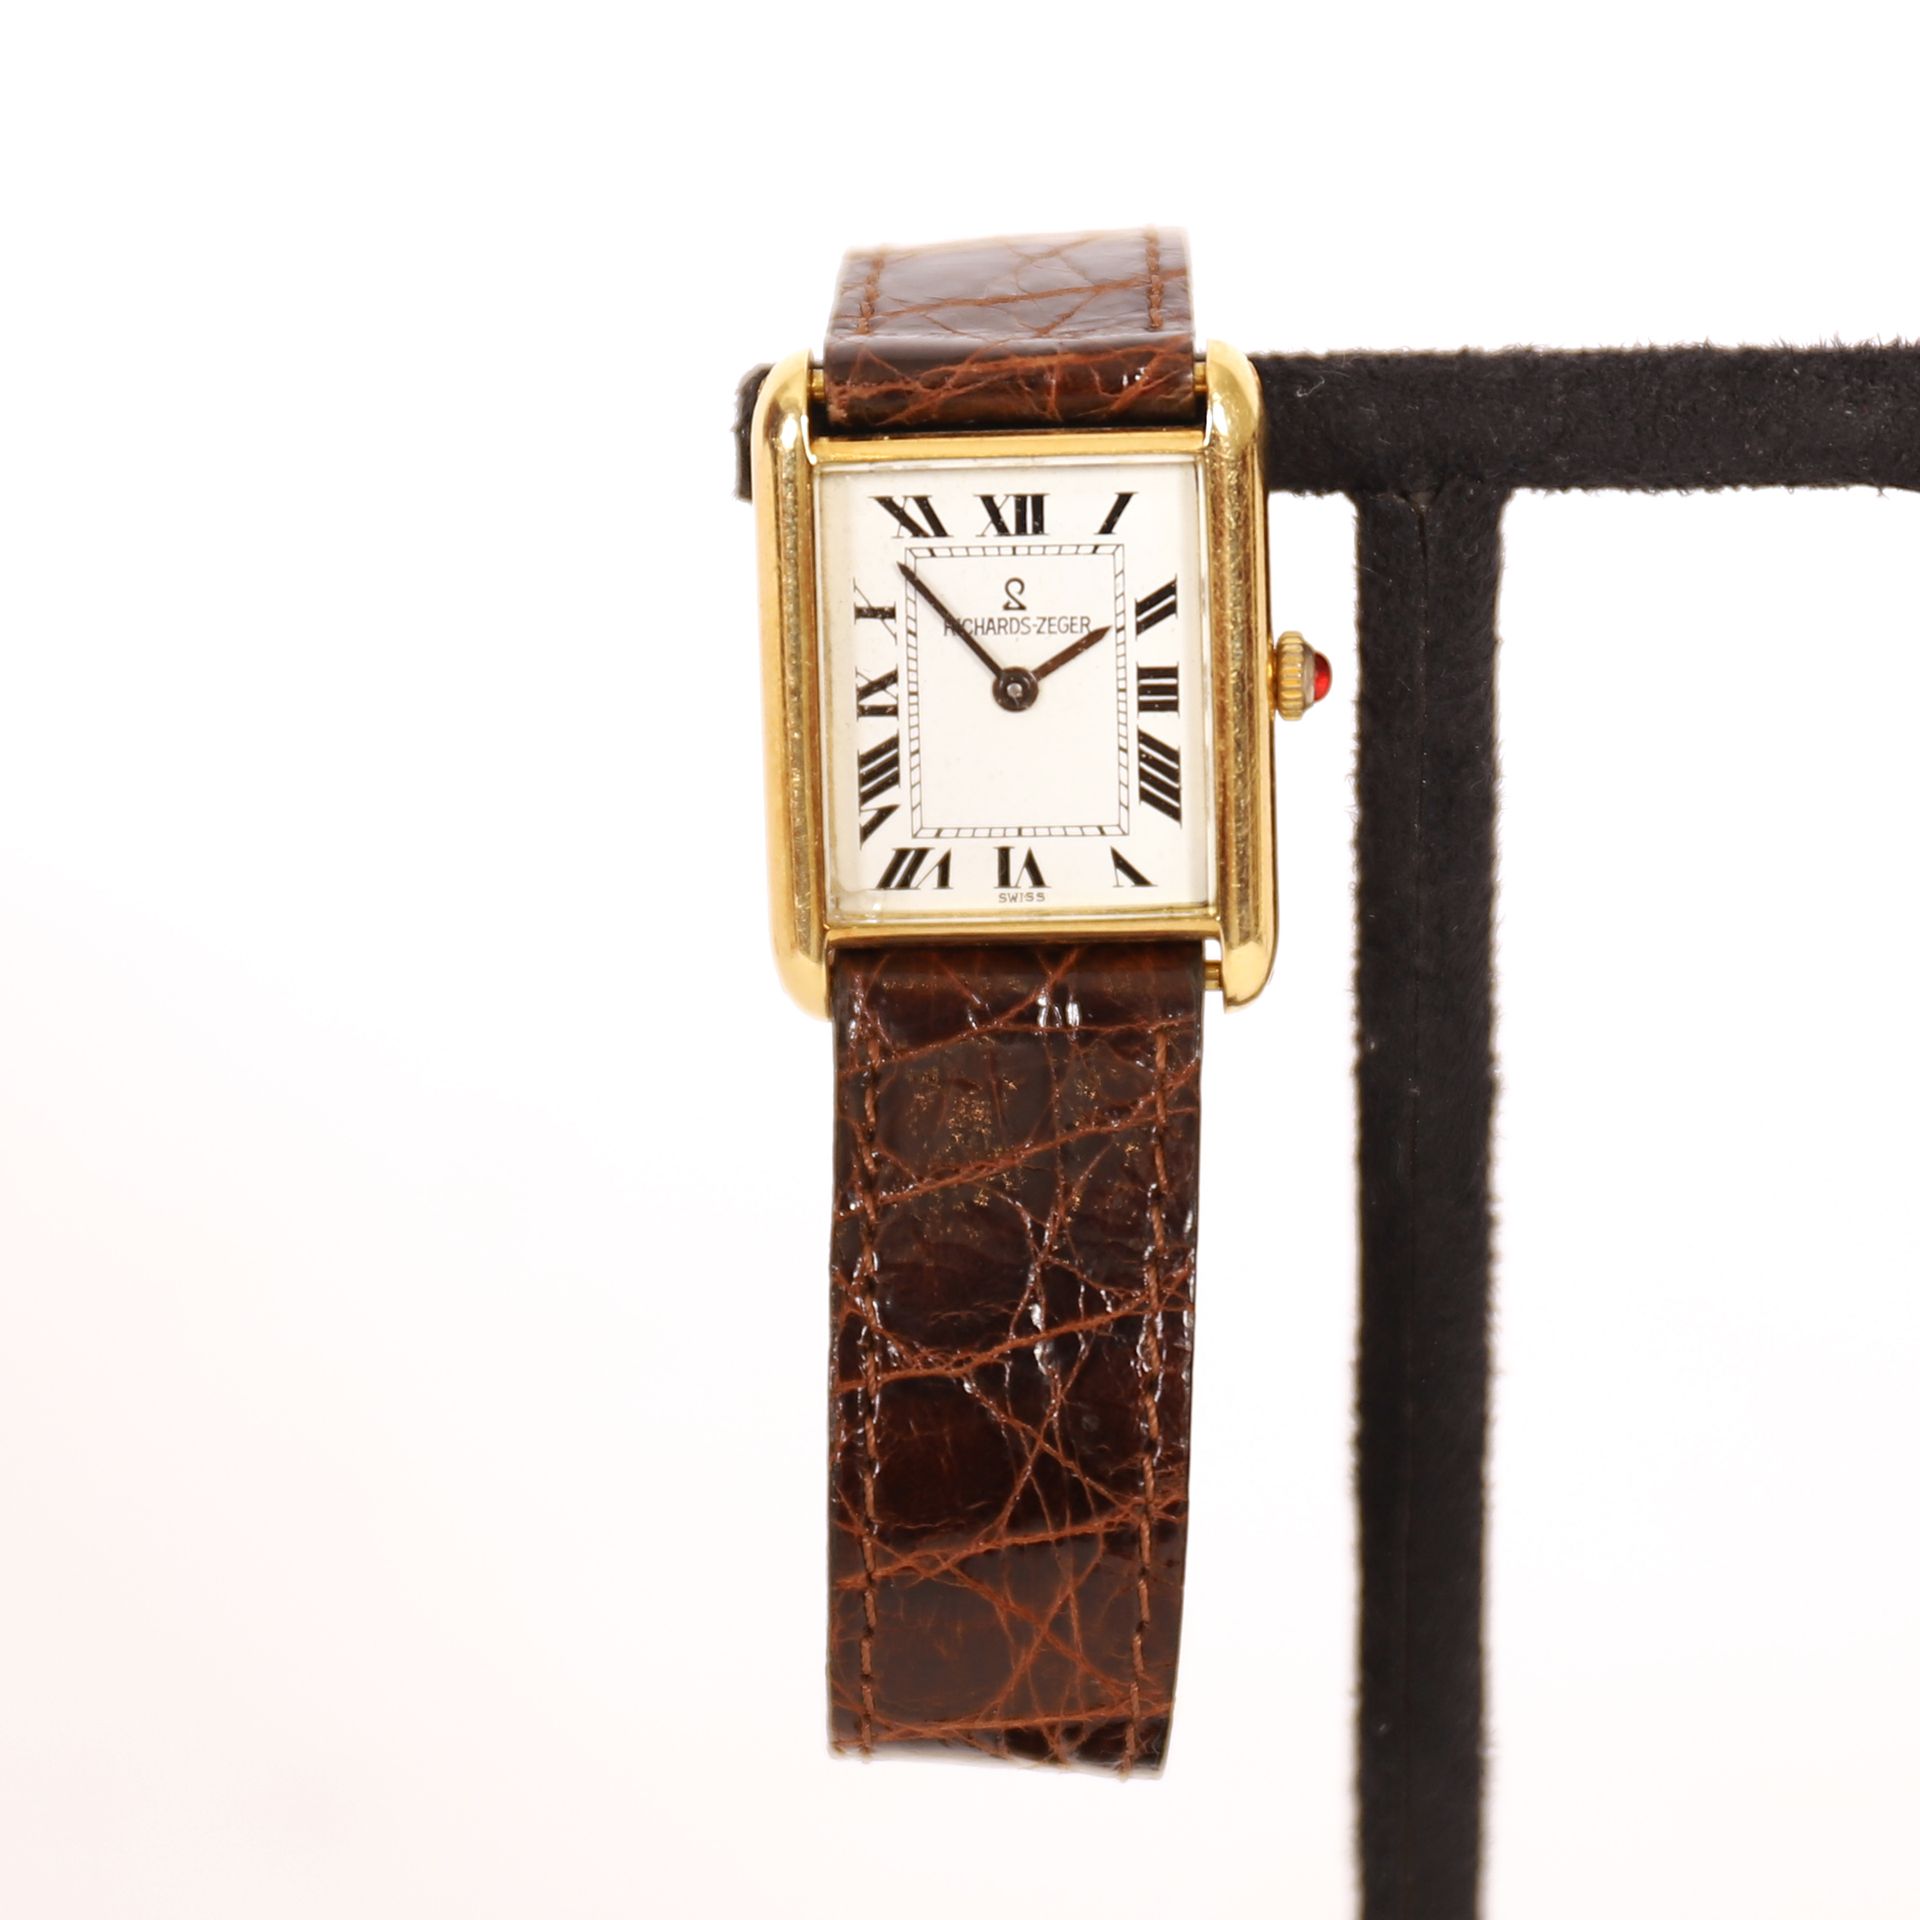 Null RICHARDS-ZEGER WATCH IN GOLD 

Brown leather strap

Weight : 32 grs

Worn